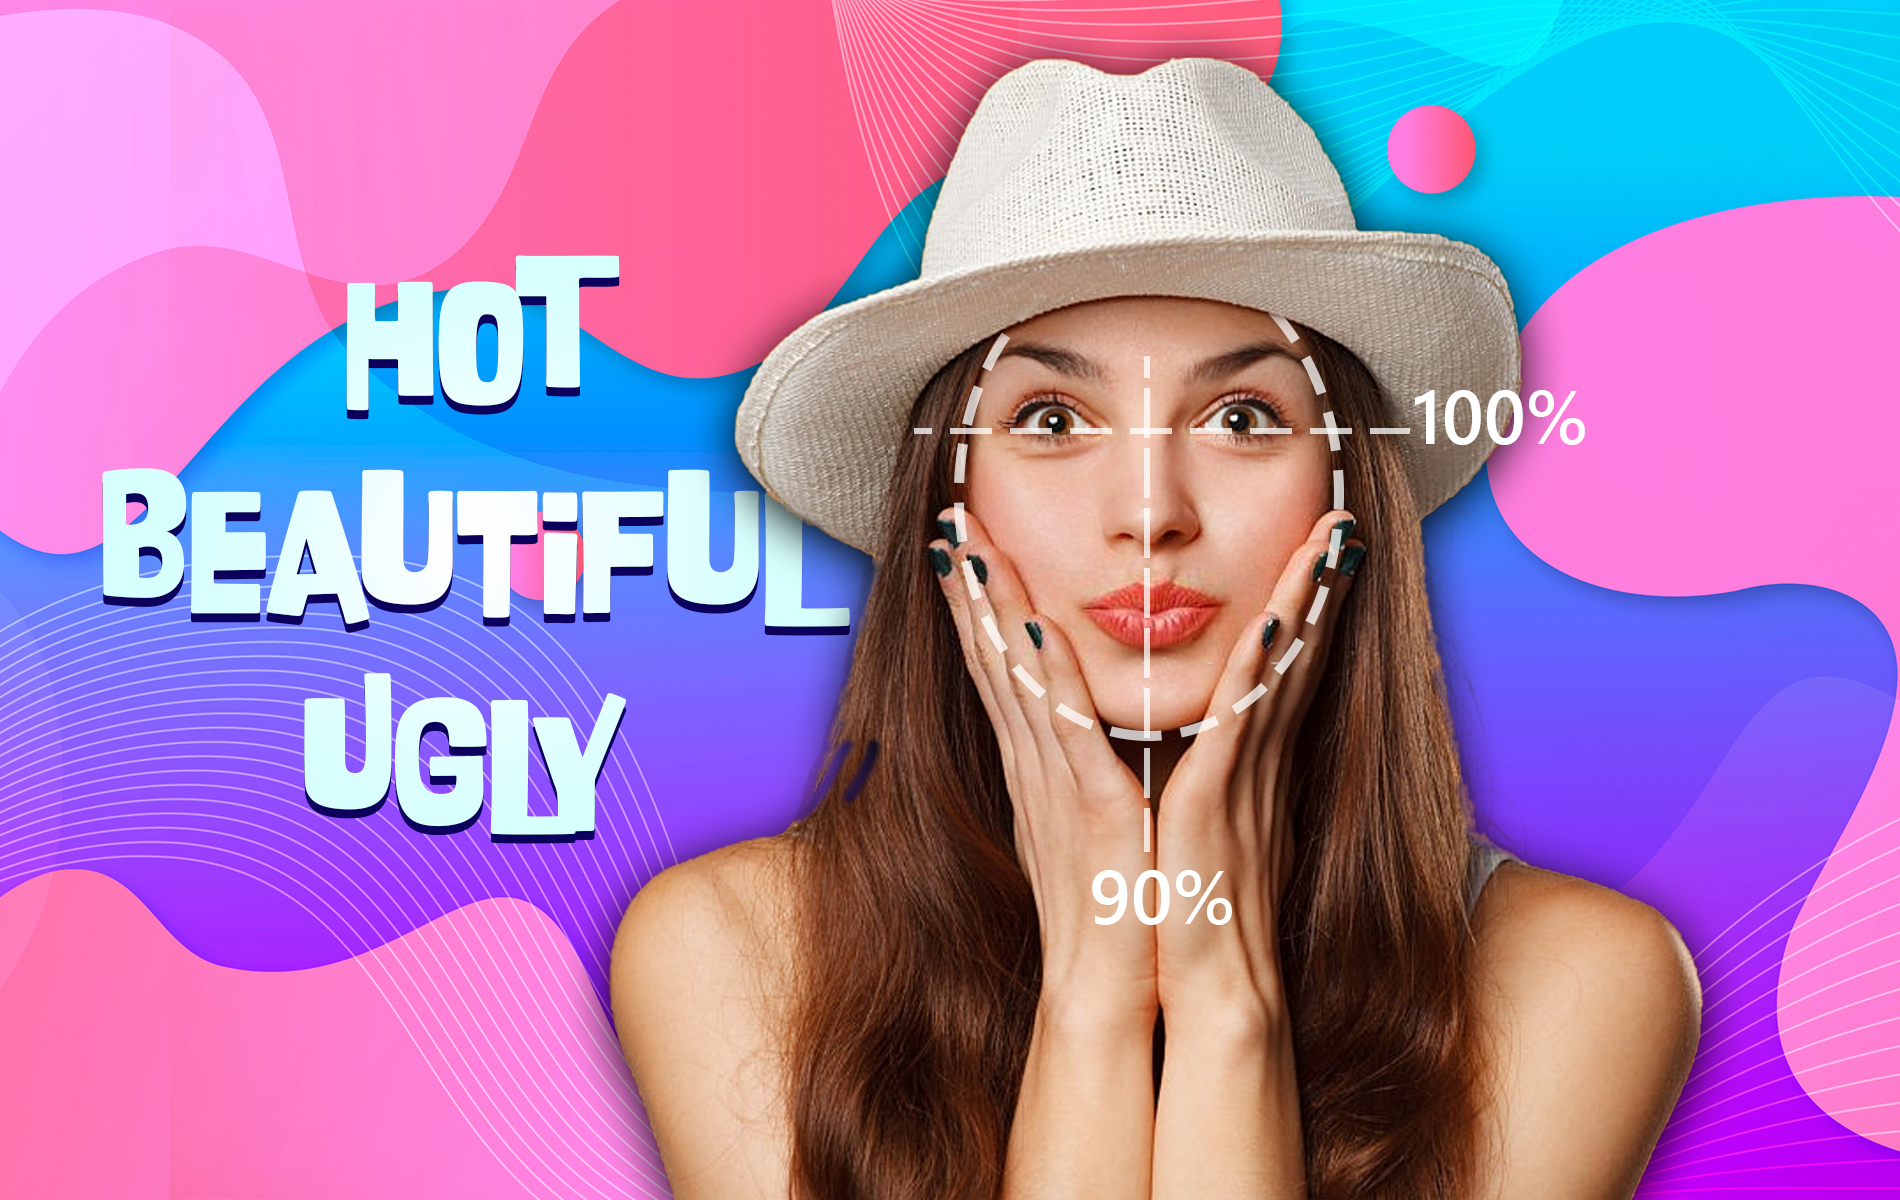 Am I beautiful or ugly? This quiz will tell you 100% honestly